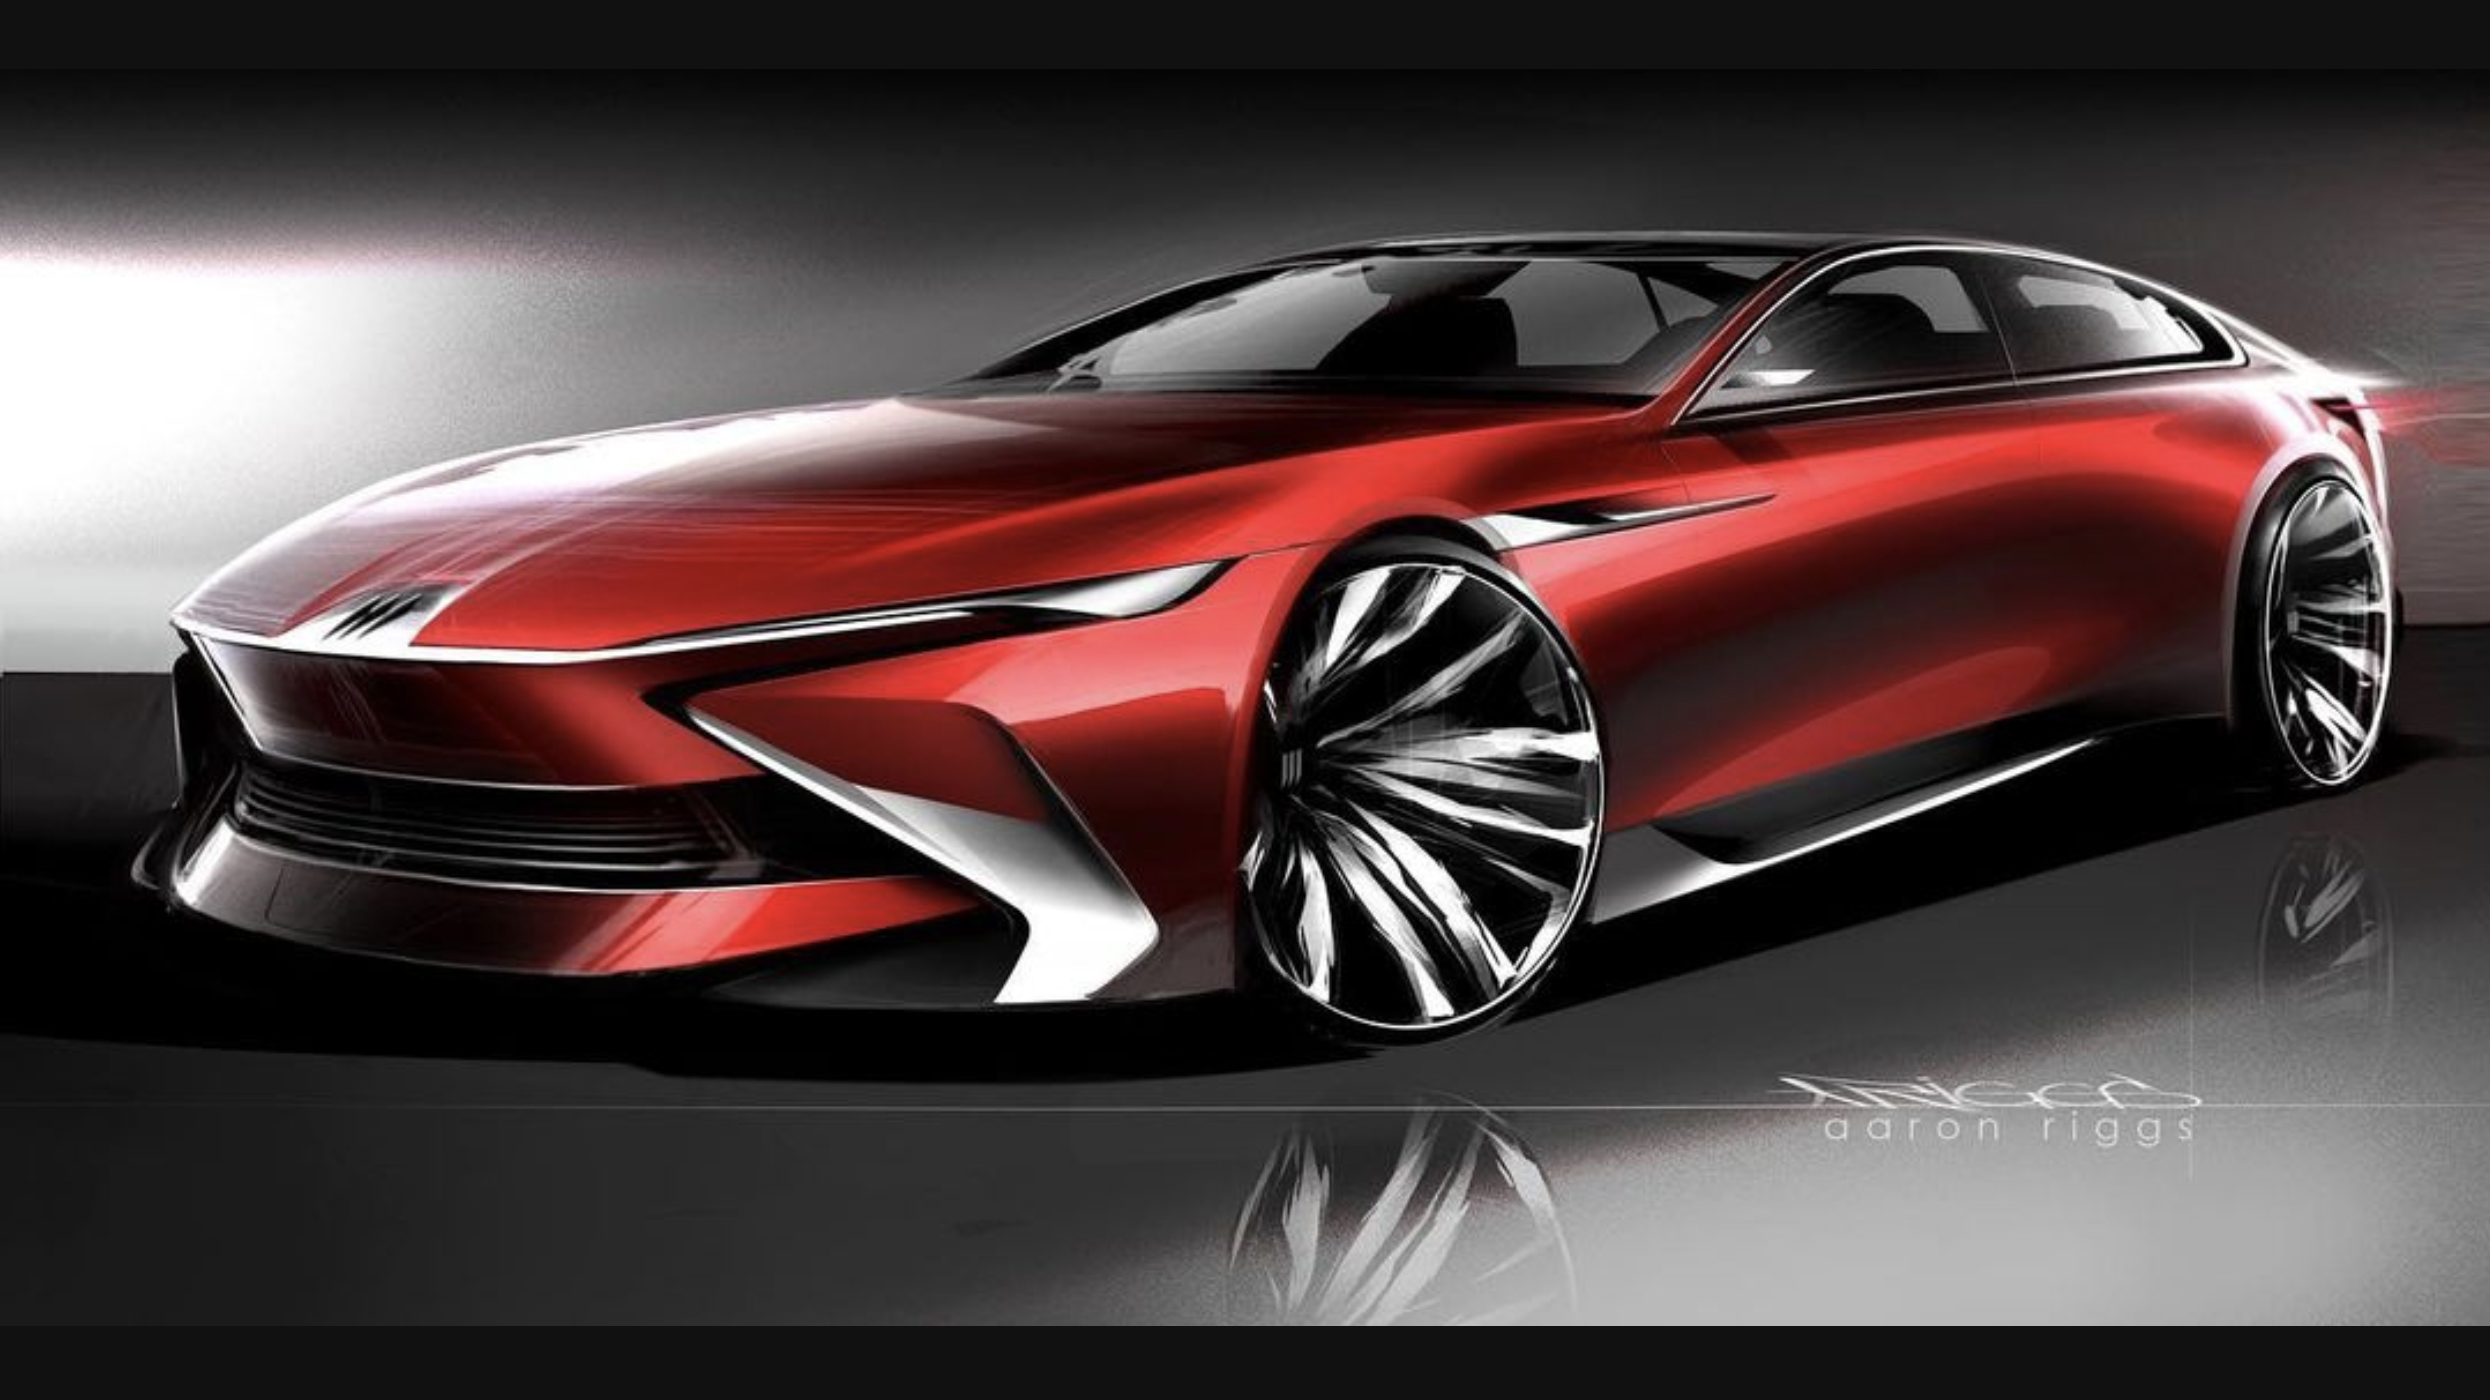 Does This GM Design Sketch Look Like An Electric Corvette SUV To You? |  Carscoops